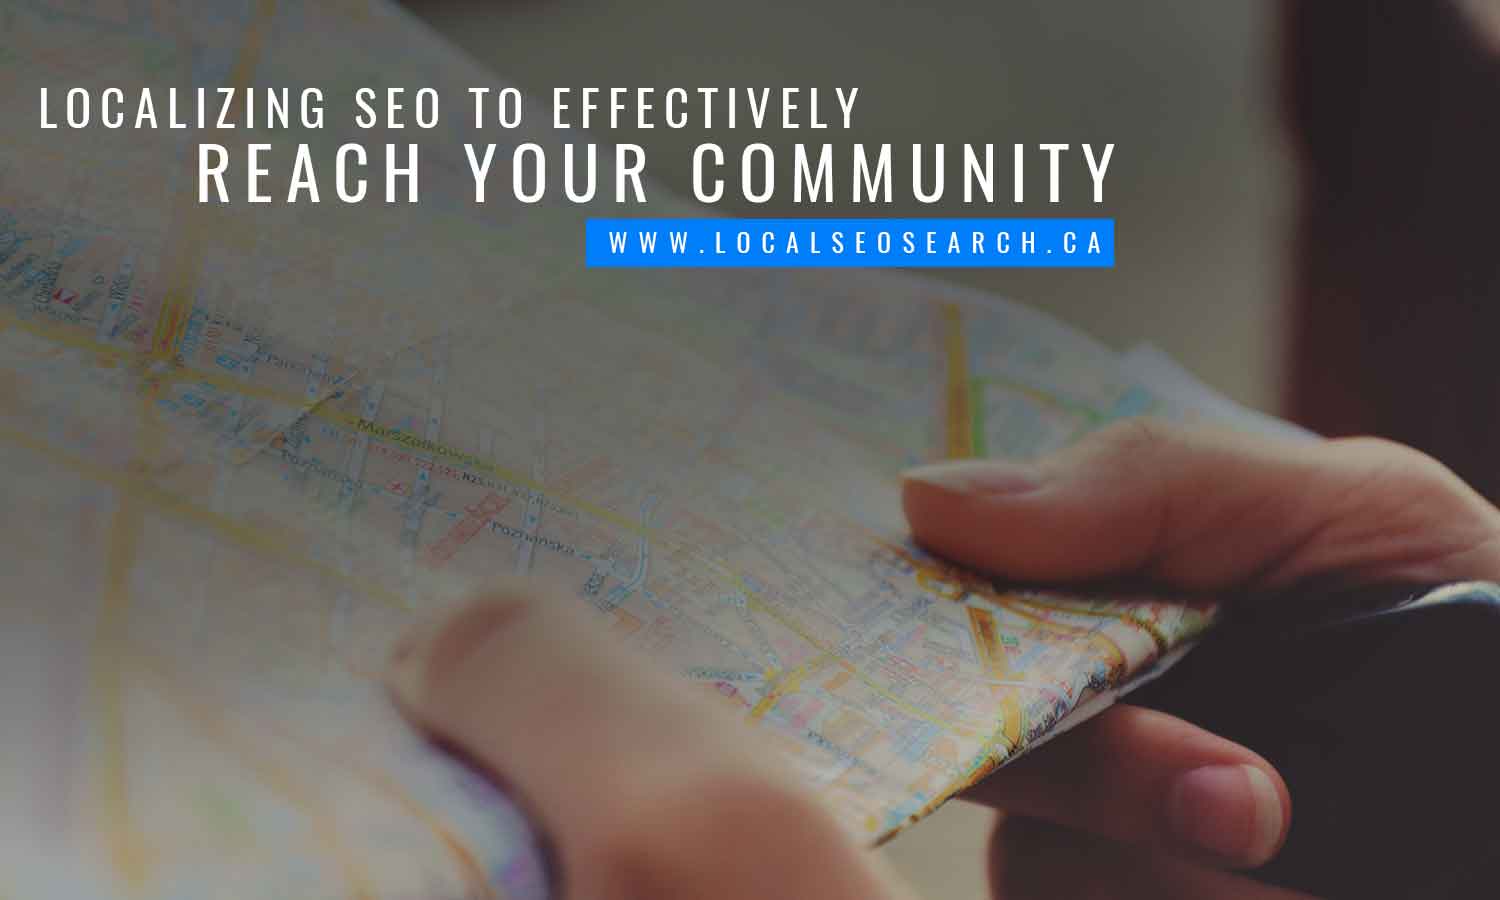 Localizing SEO to effectively reach your community